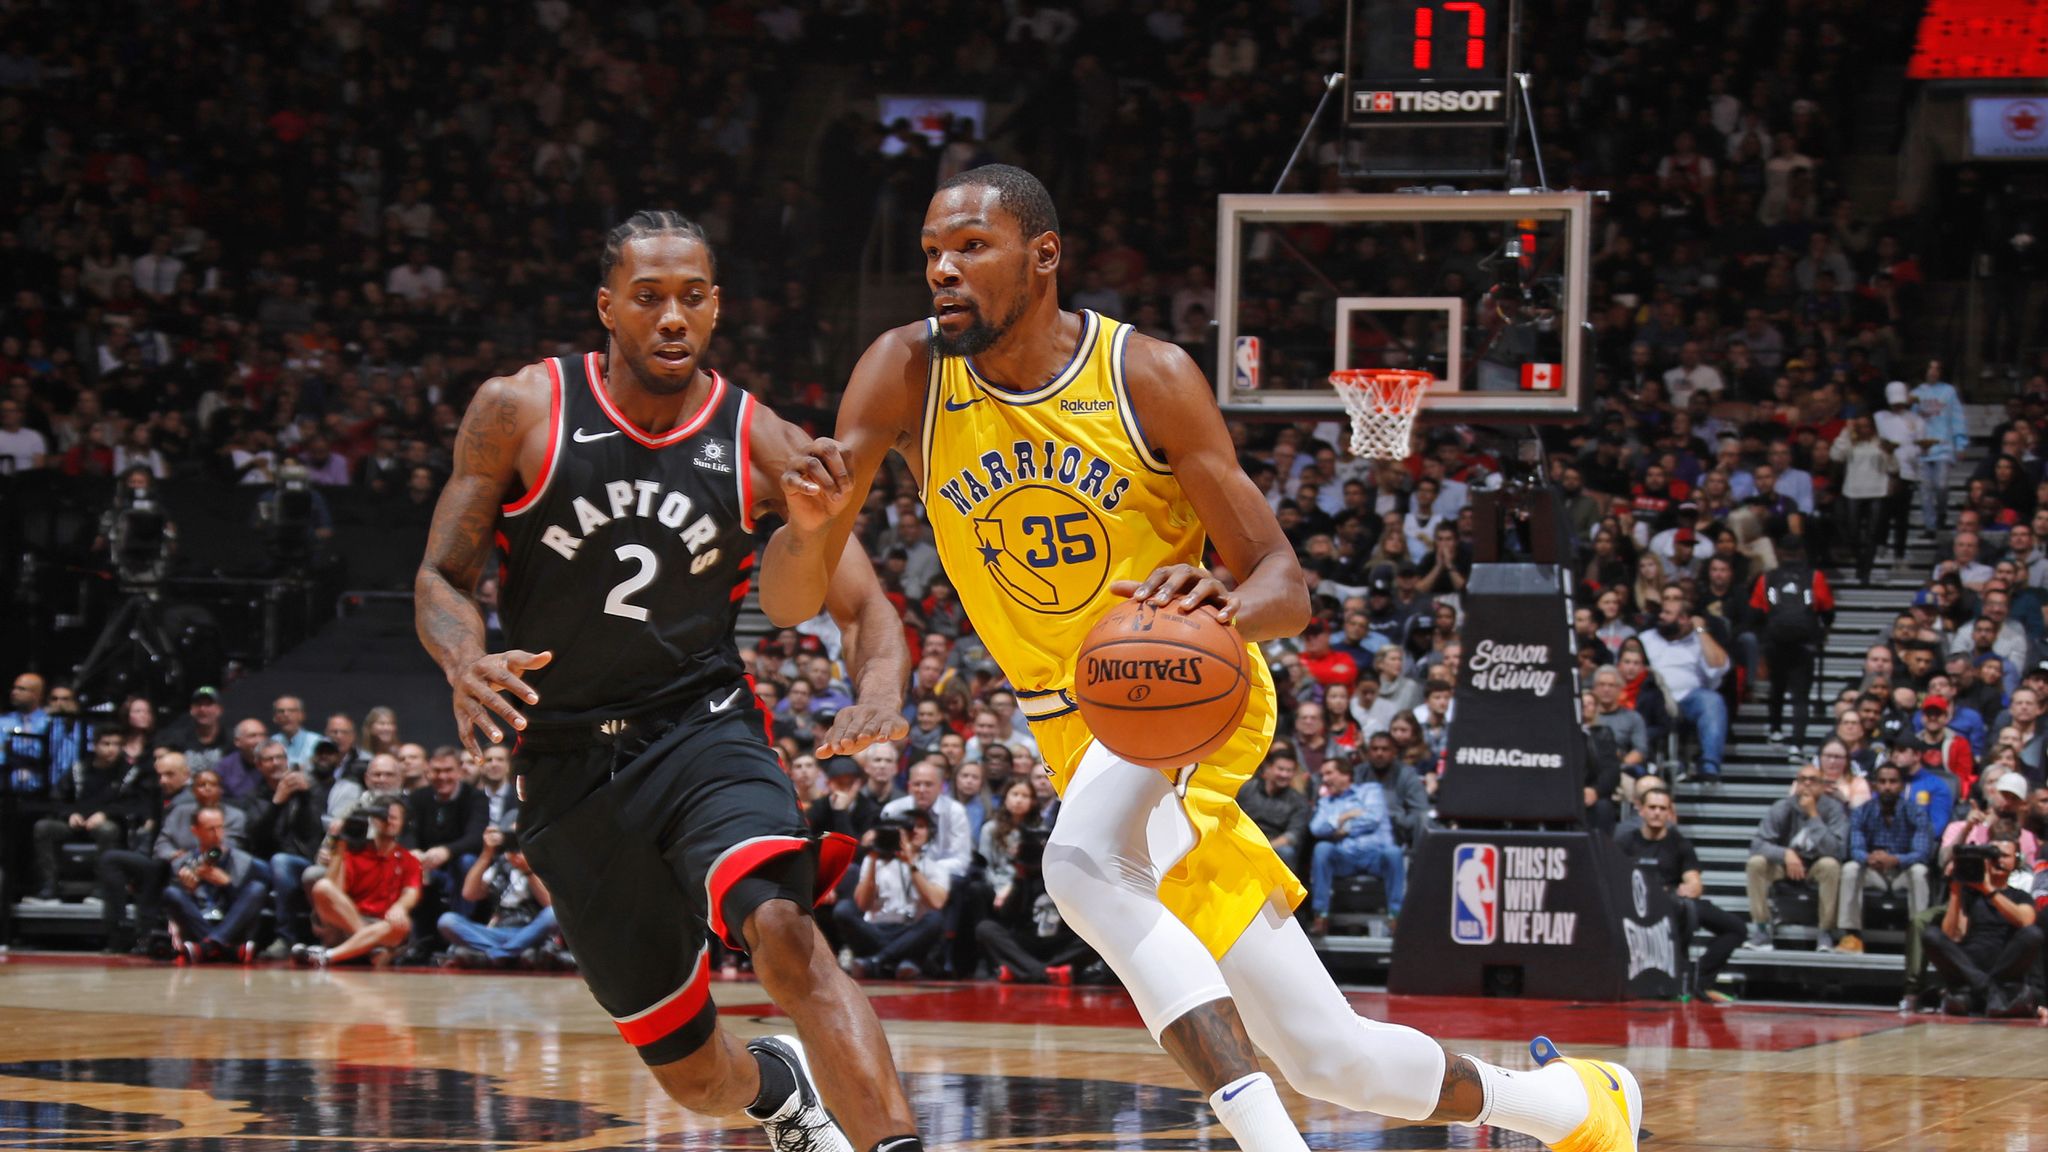 Toronto Raptors may be home, but pivotal season could determine